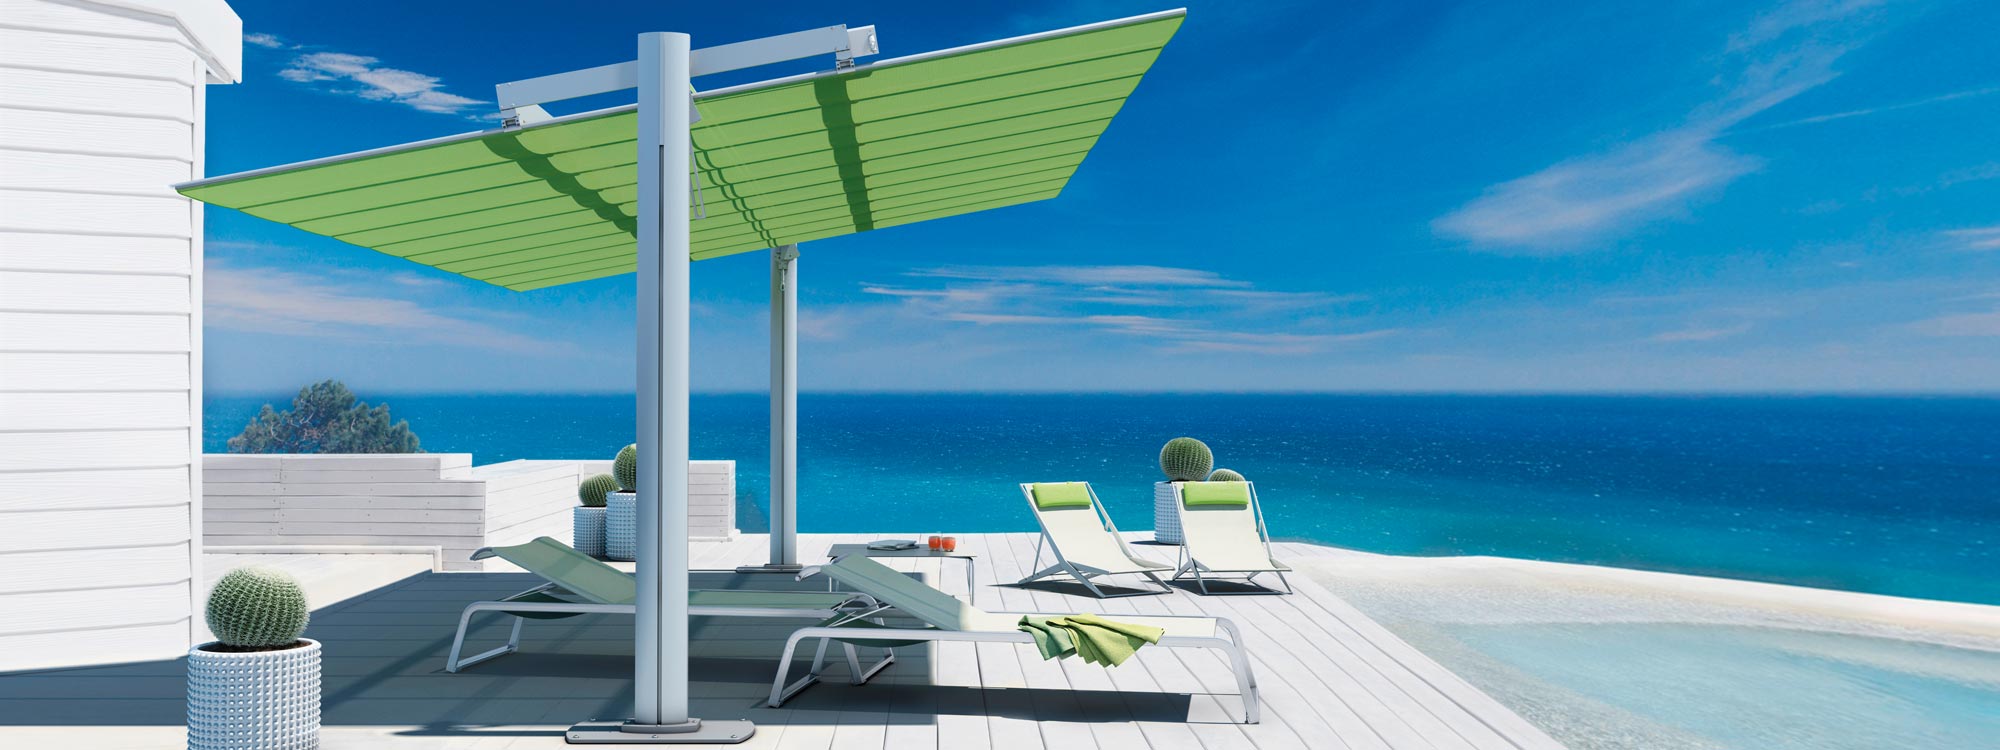 Flexy Large freestanding sun shade over Coro L3 loungers and Boomy chairs on sunny terrace with azure sea in background